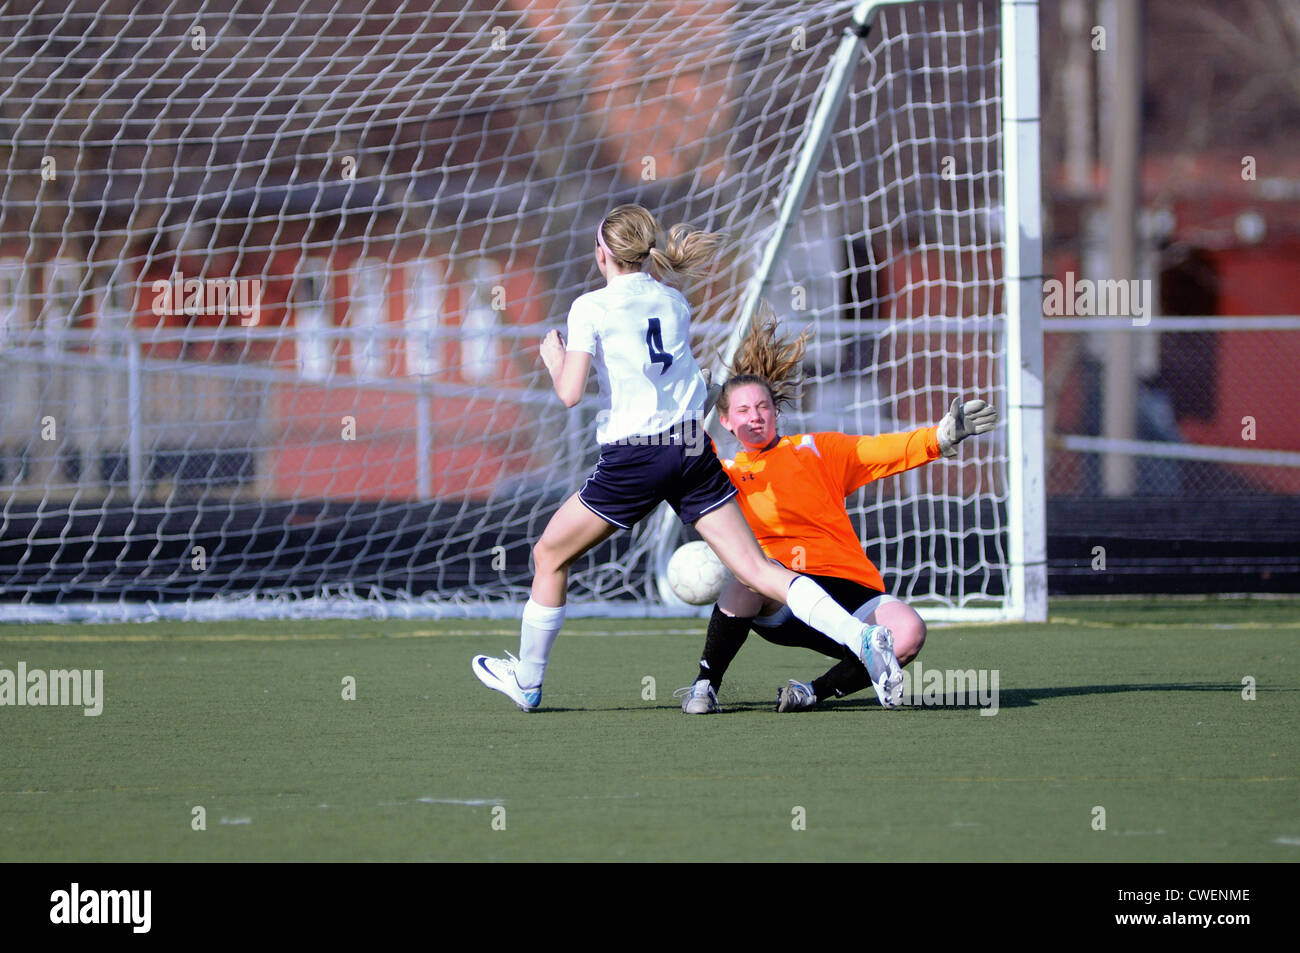 Soccer Player scores as she fires a shot past the keeper from close range. USA. Stock Photo